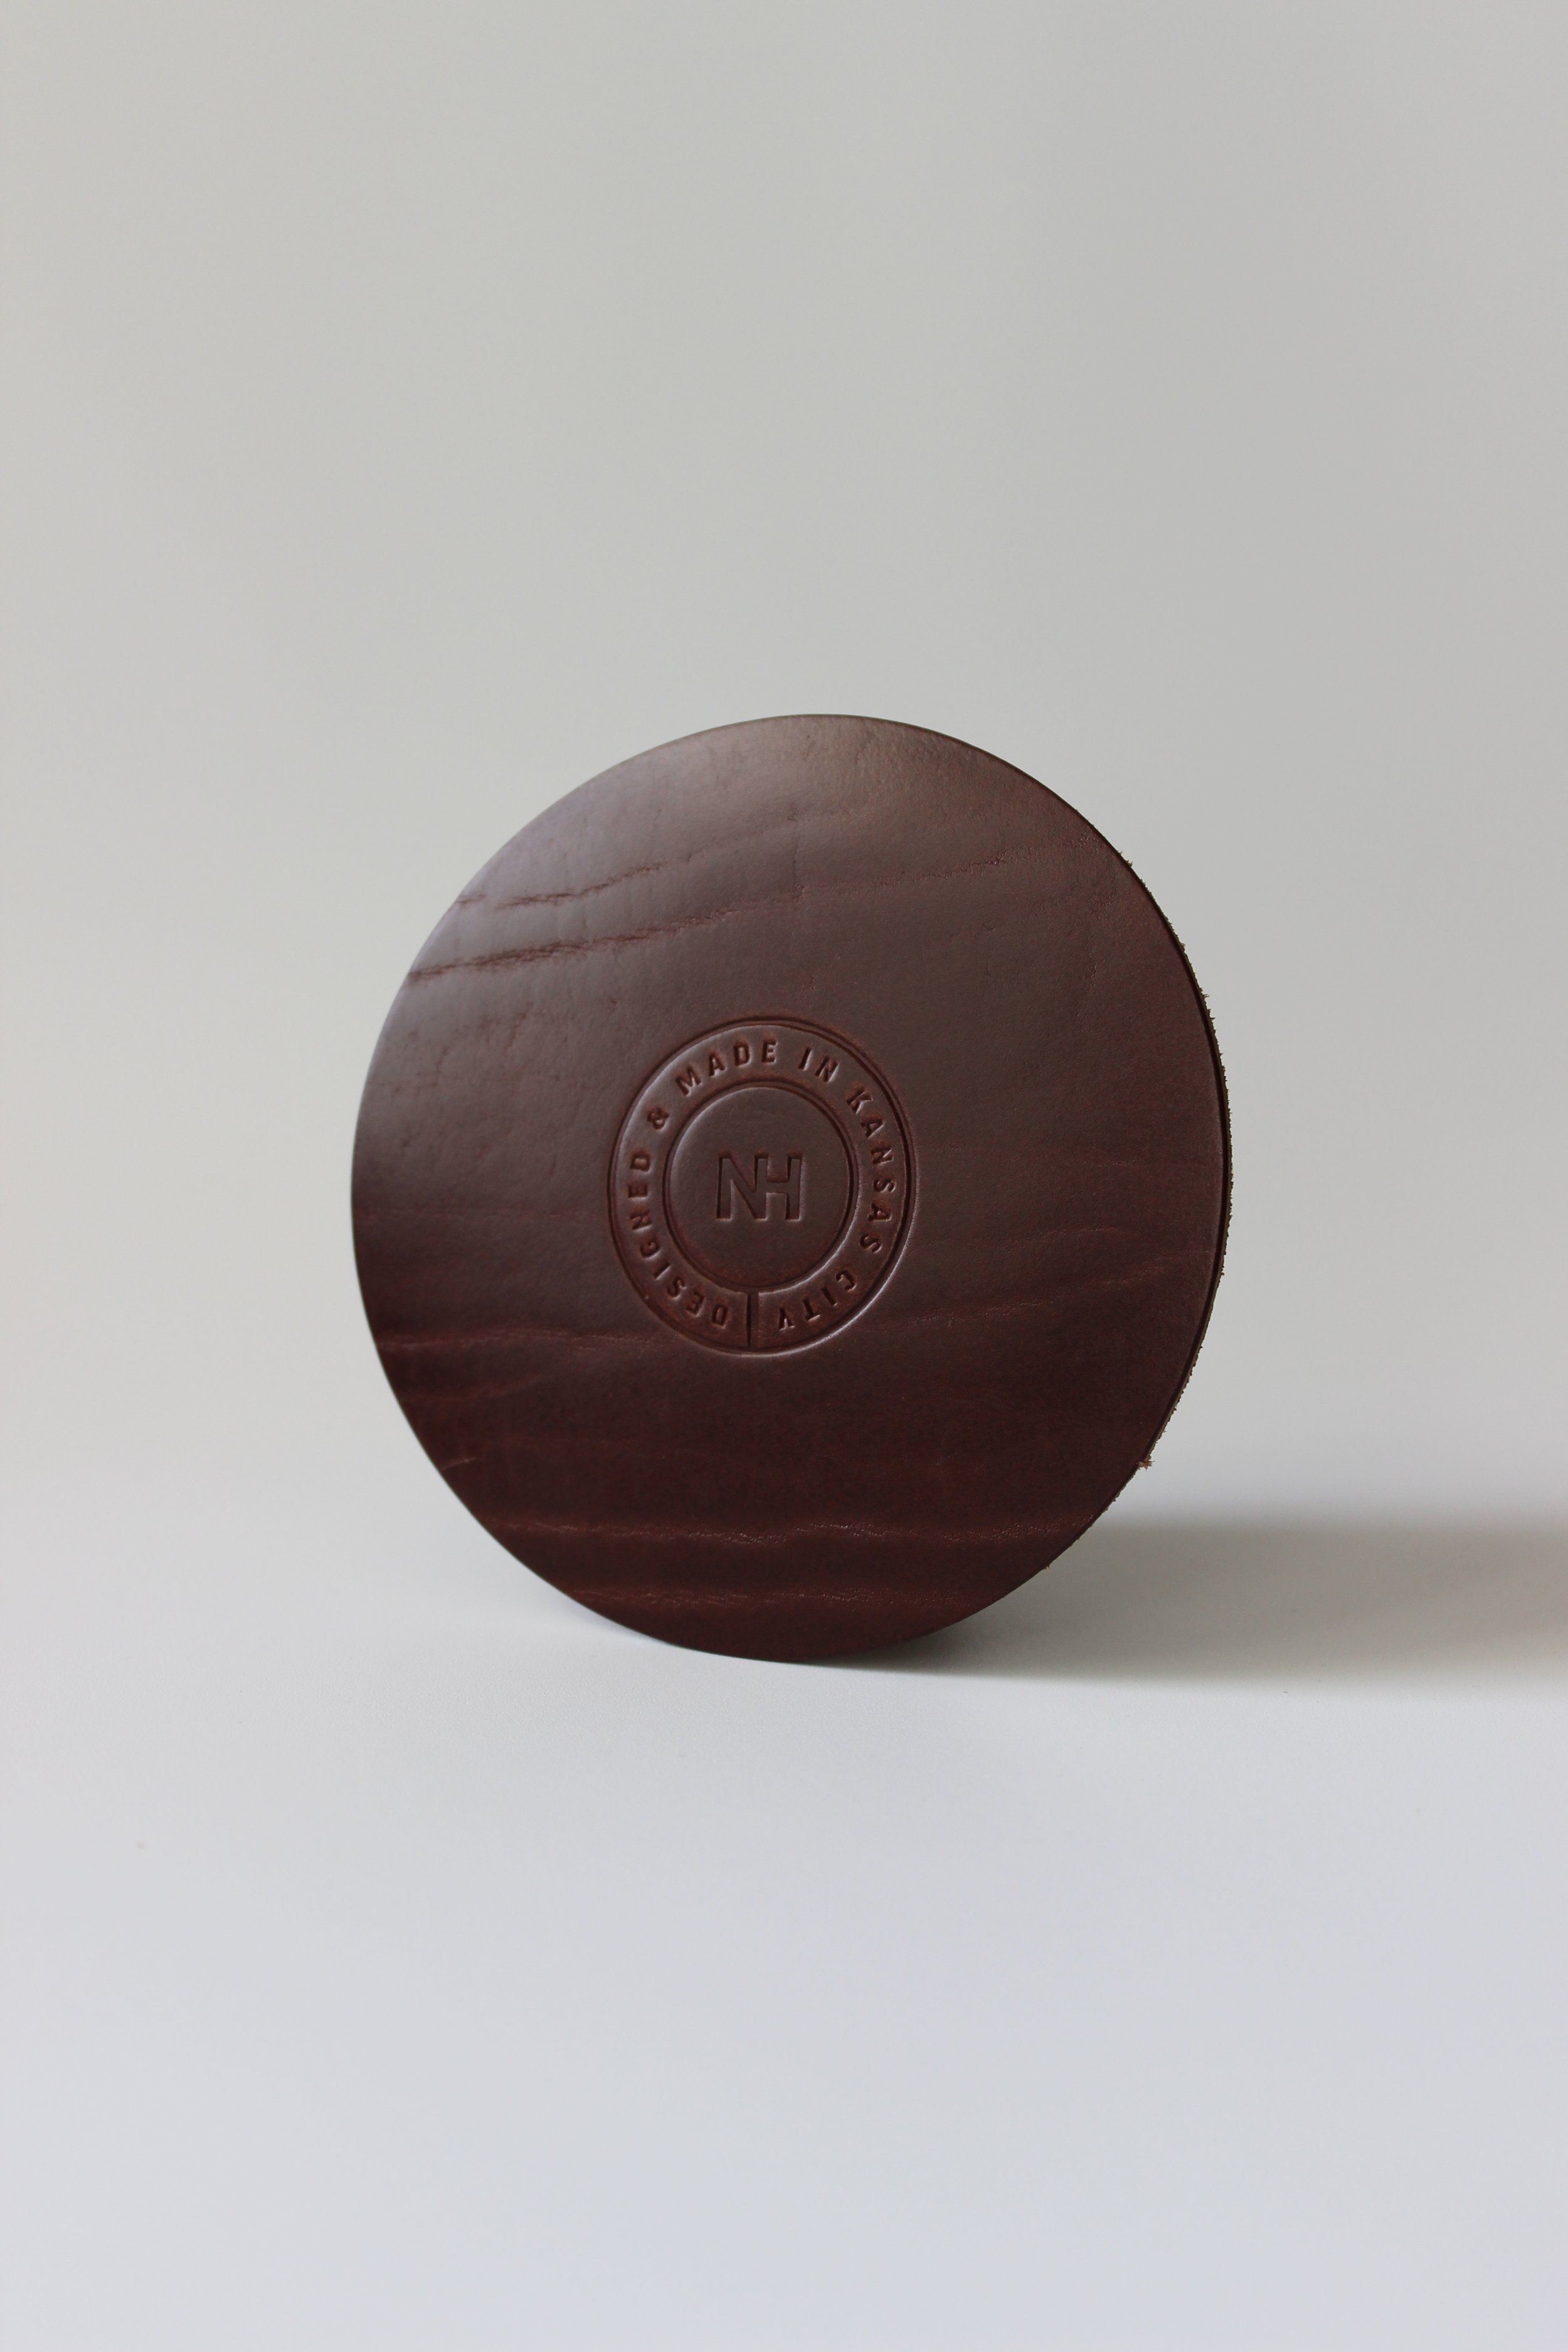 NH Leather Putting Discs – $16+